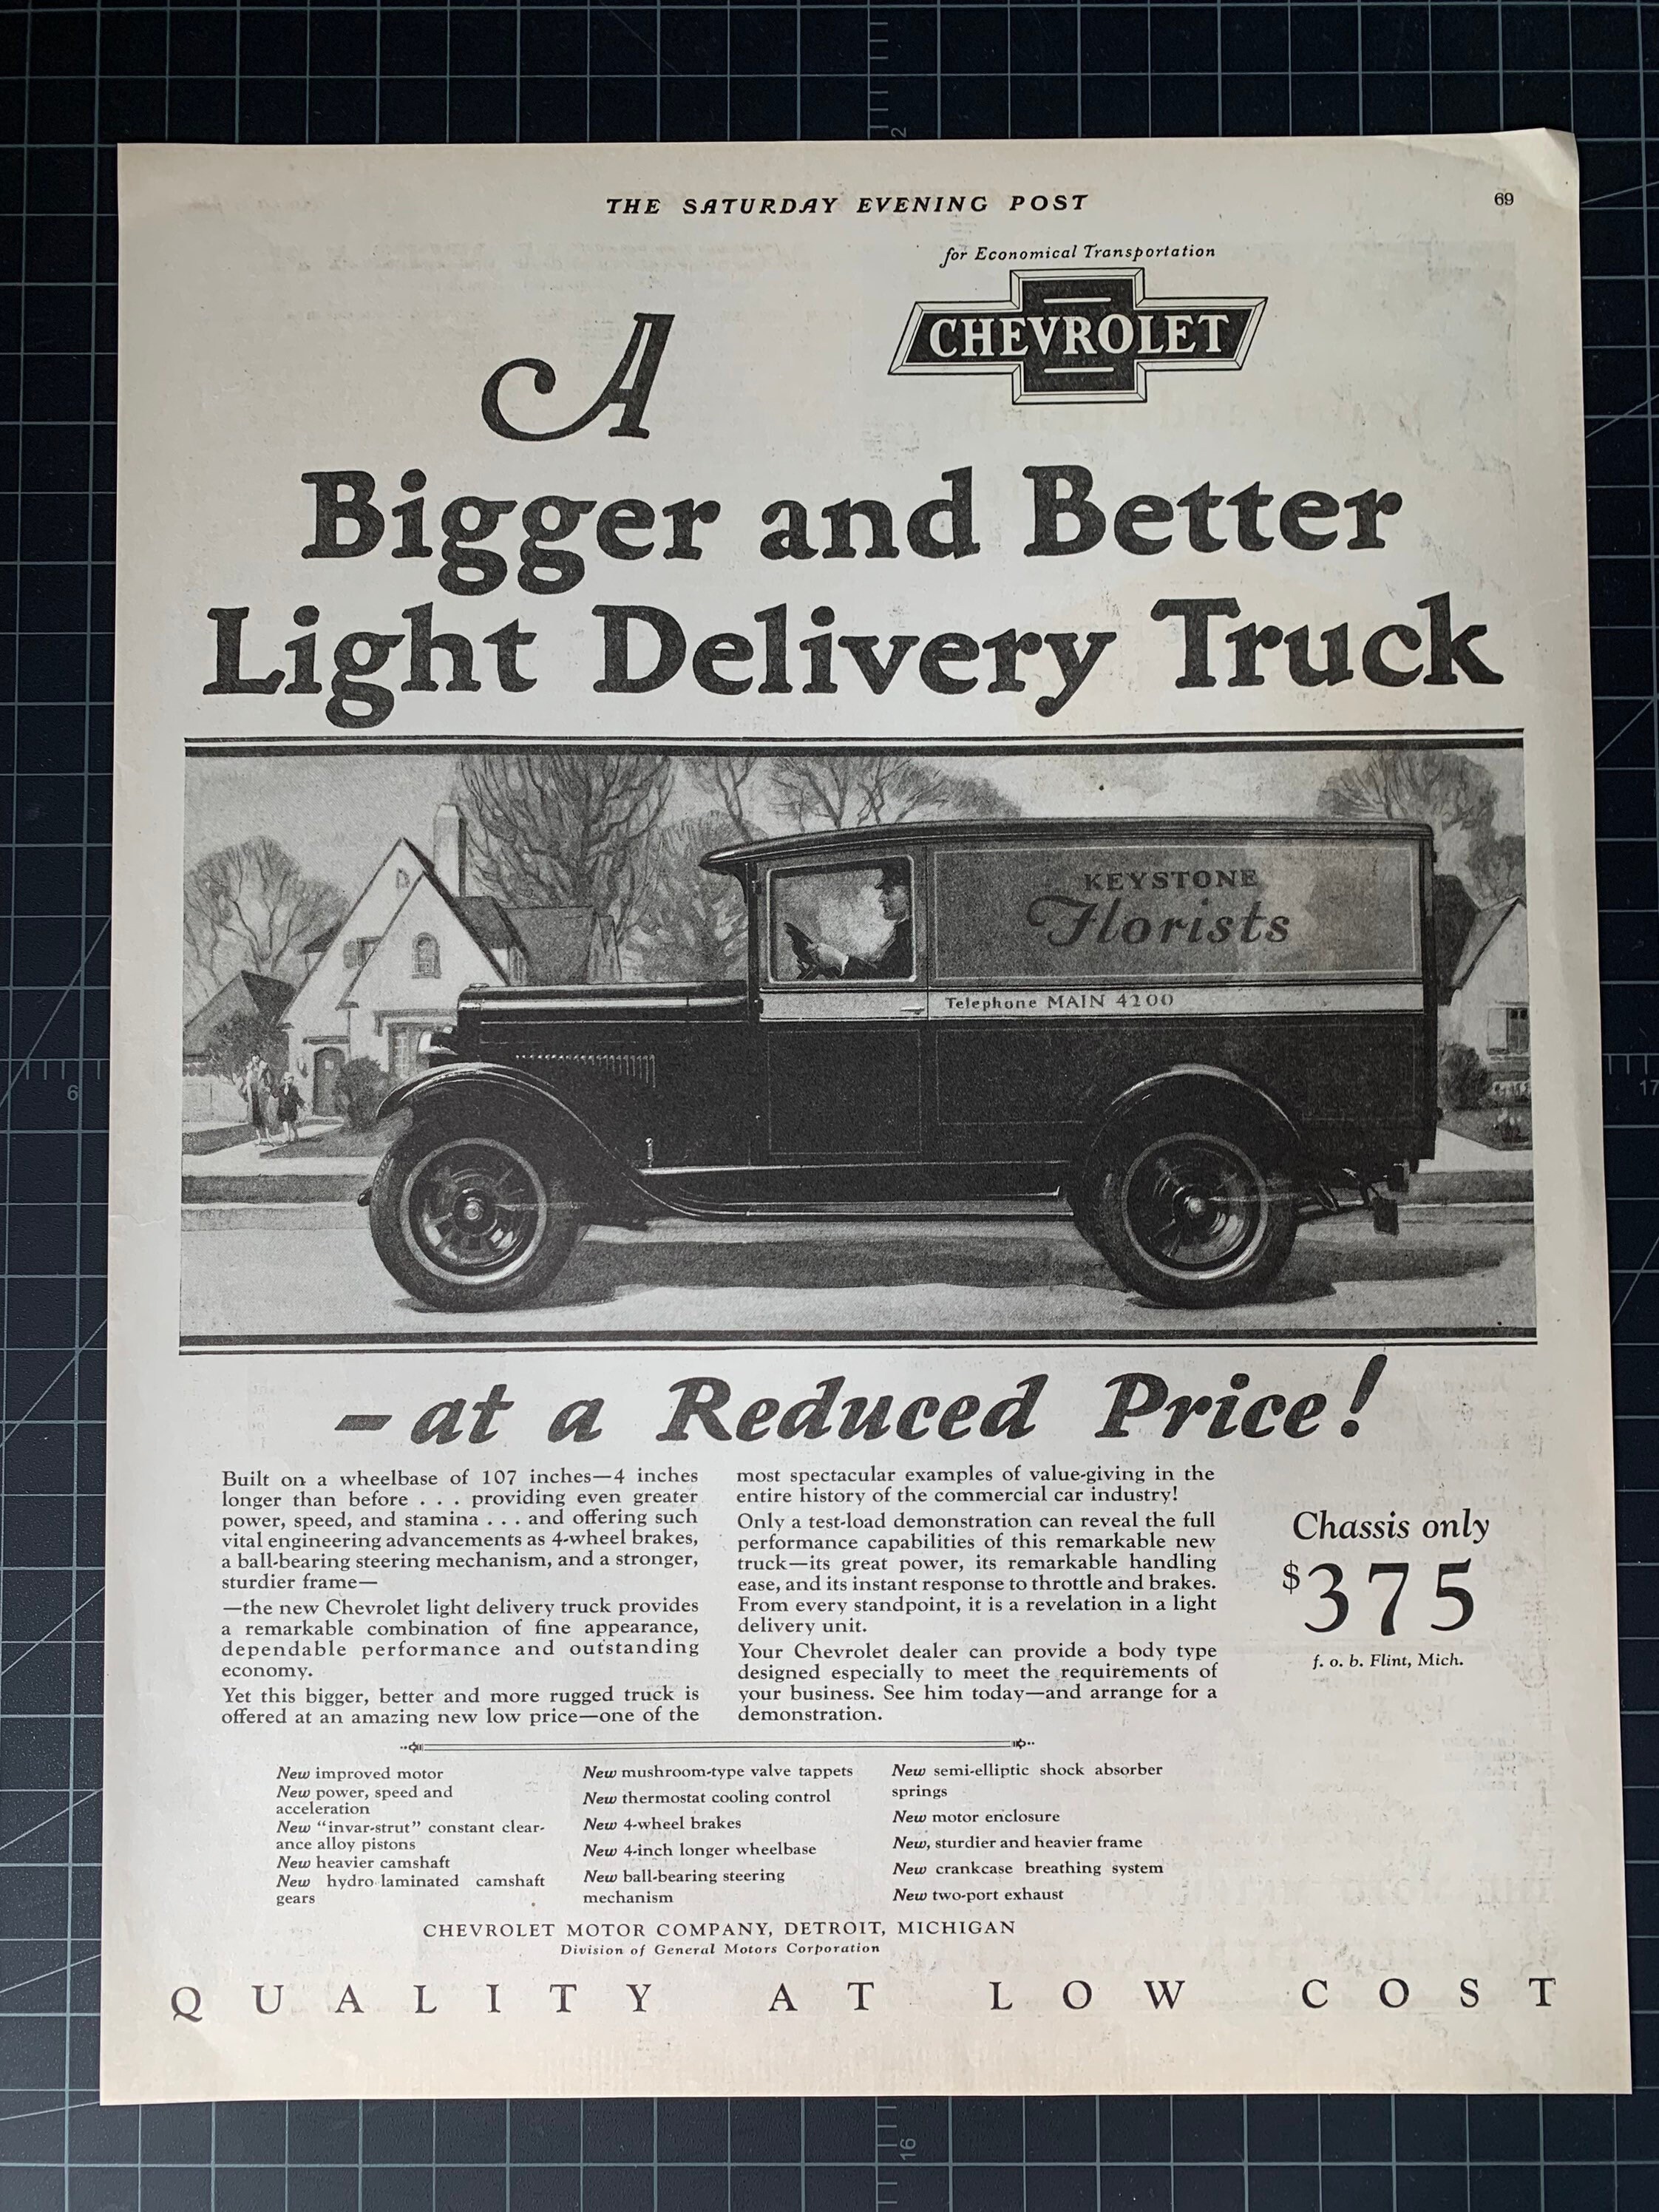 Chevrolet Light Delivery